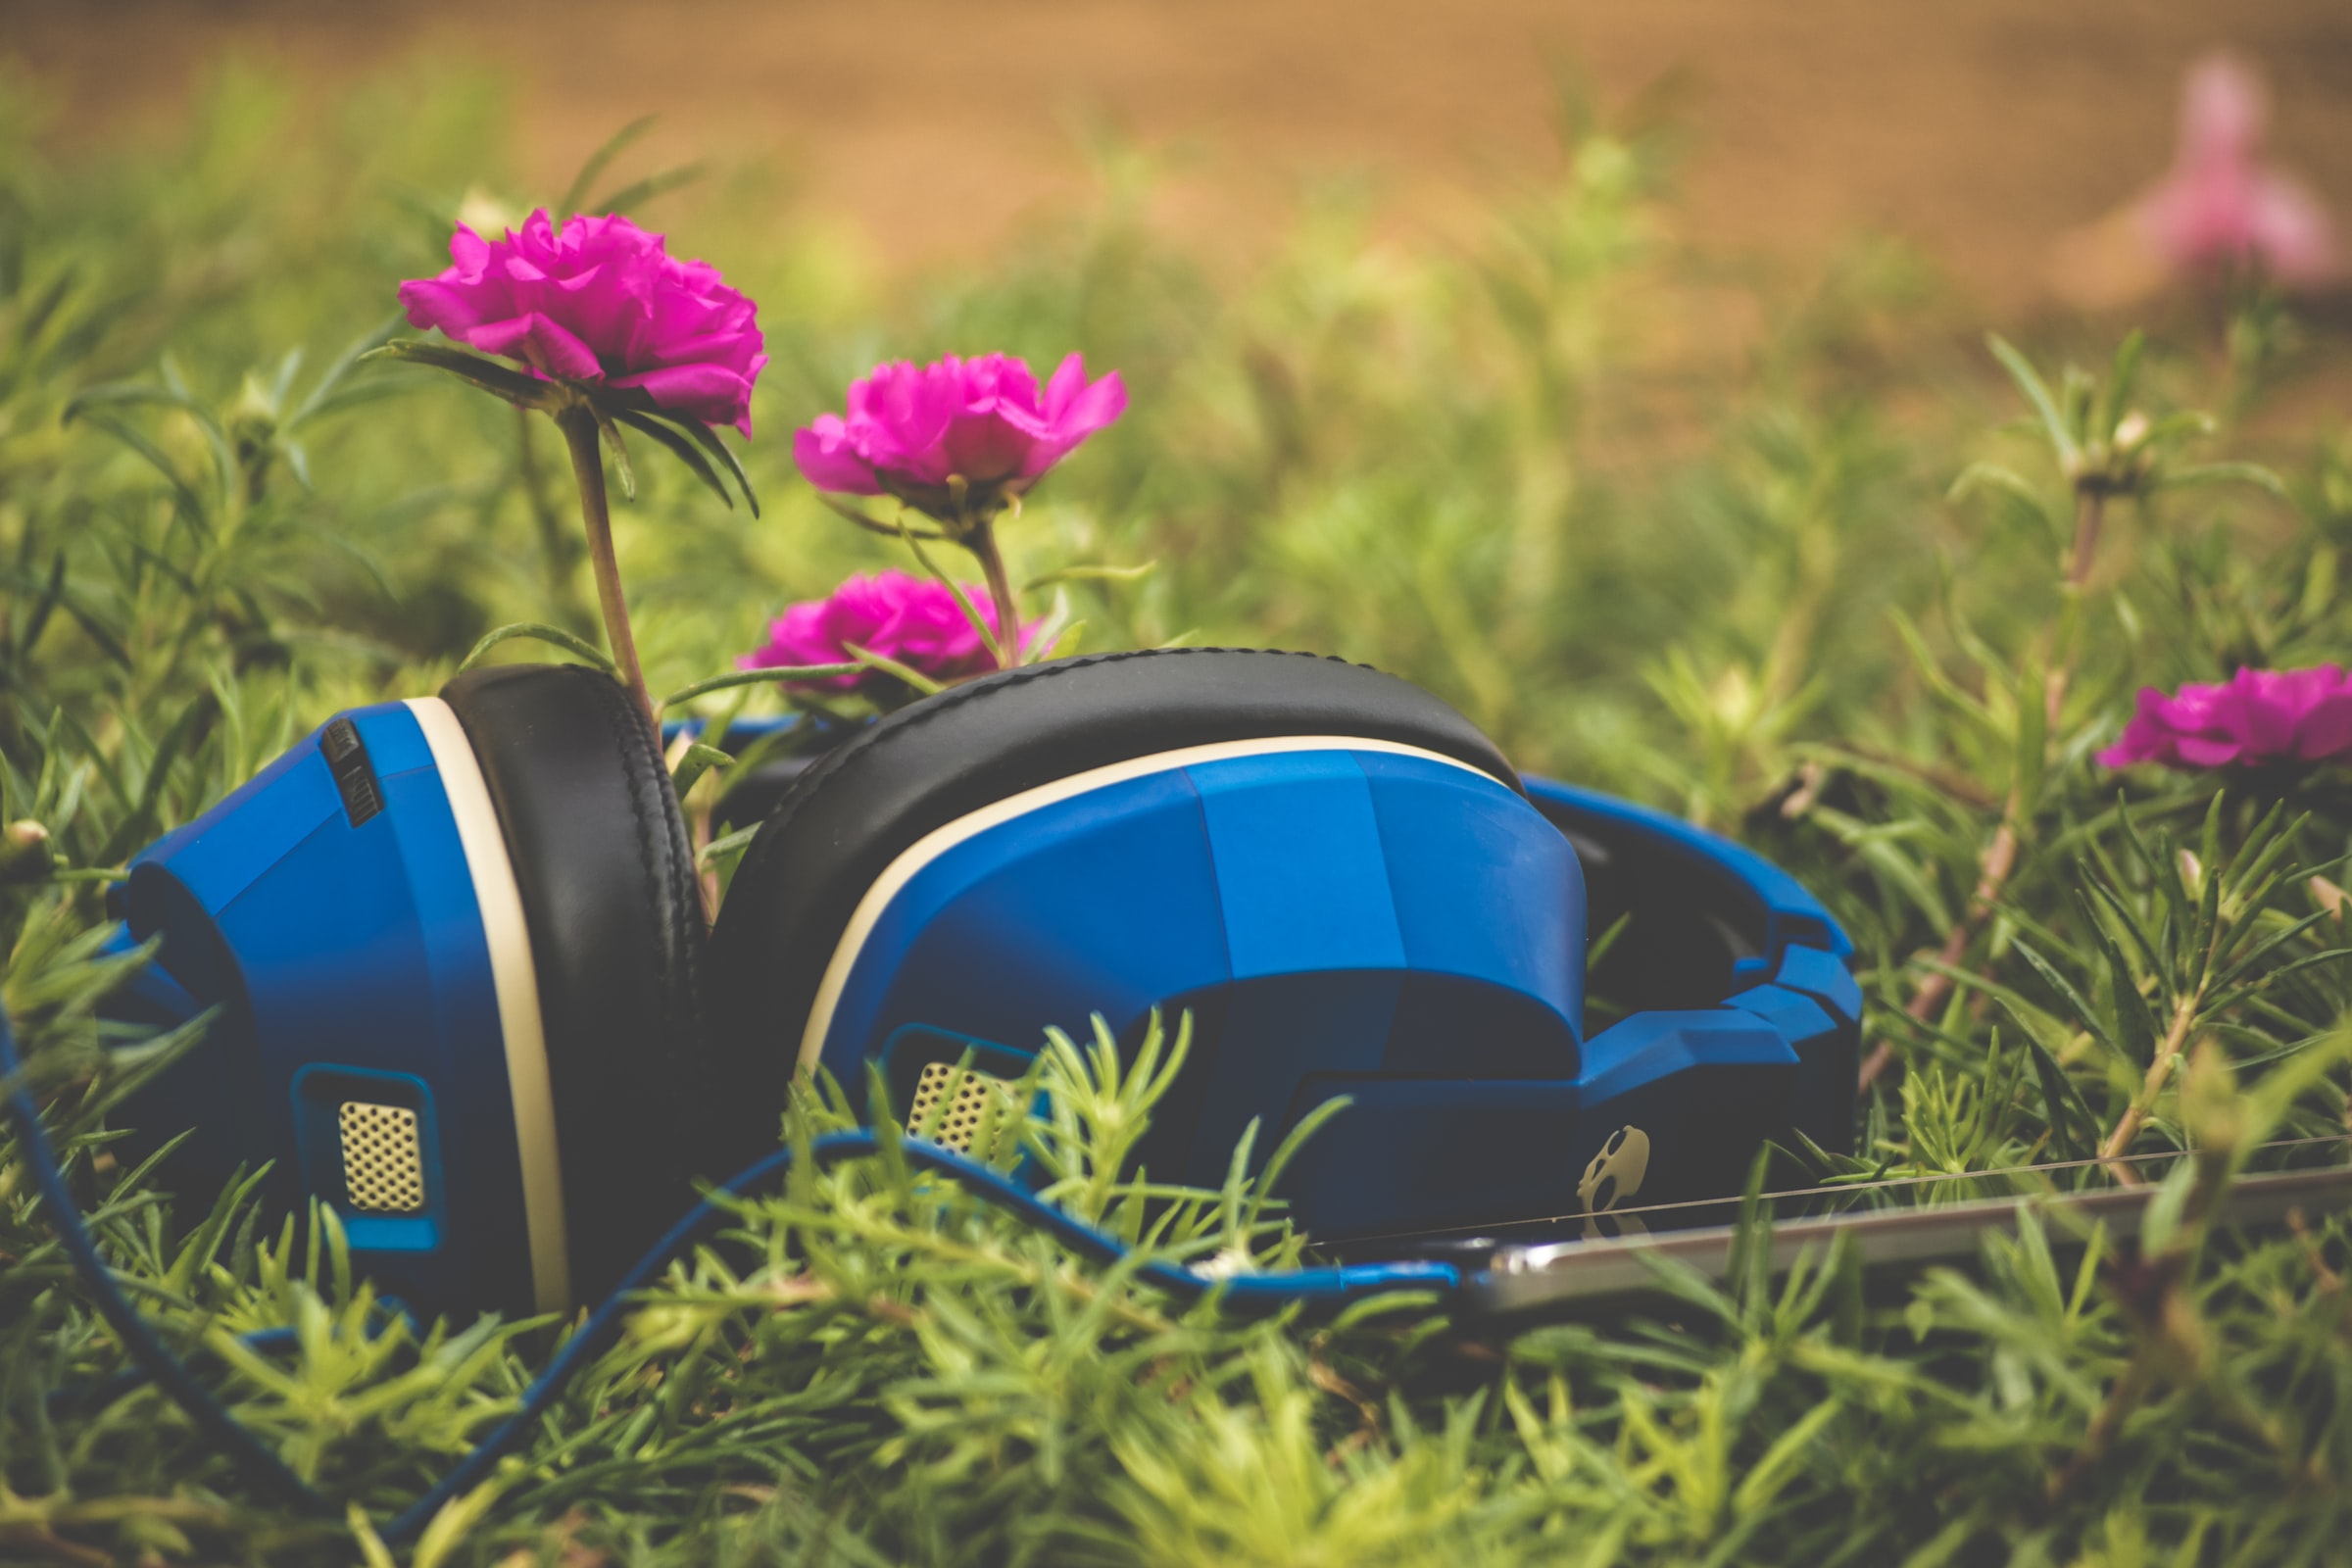 headphones lying in the grass with flowers